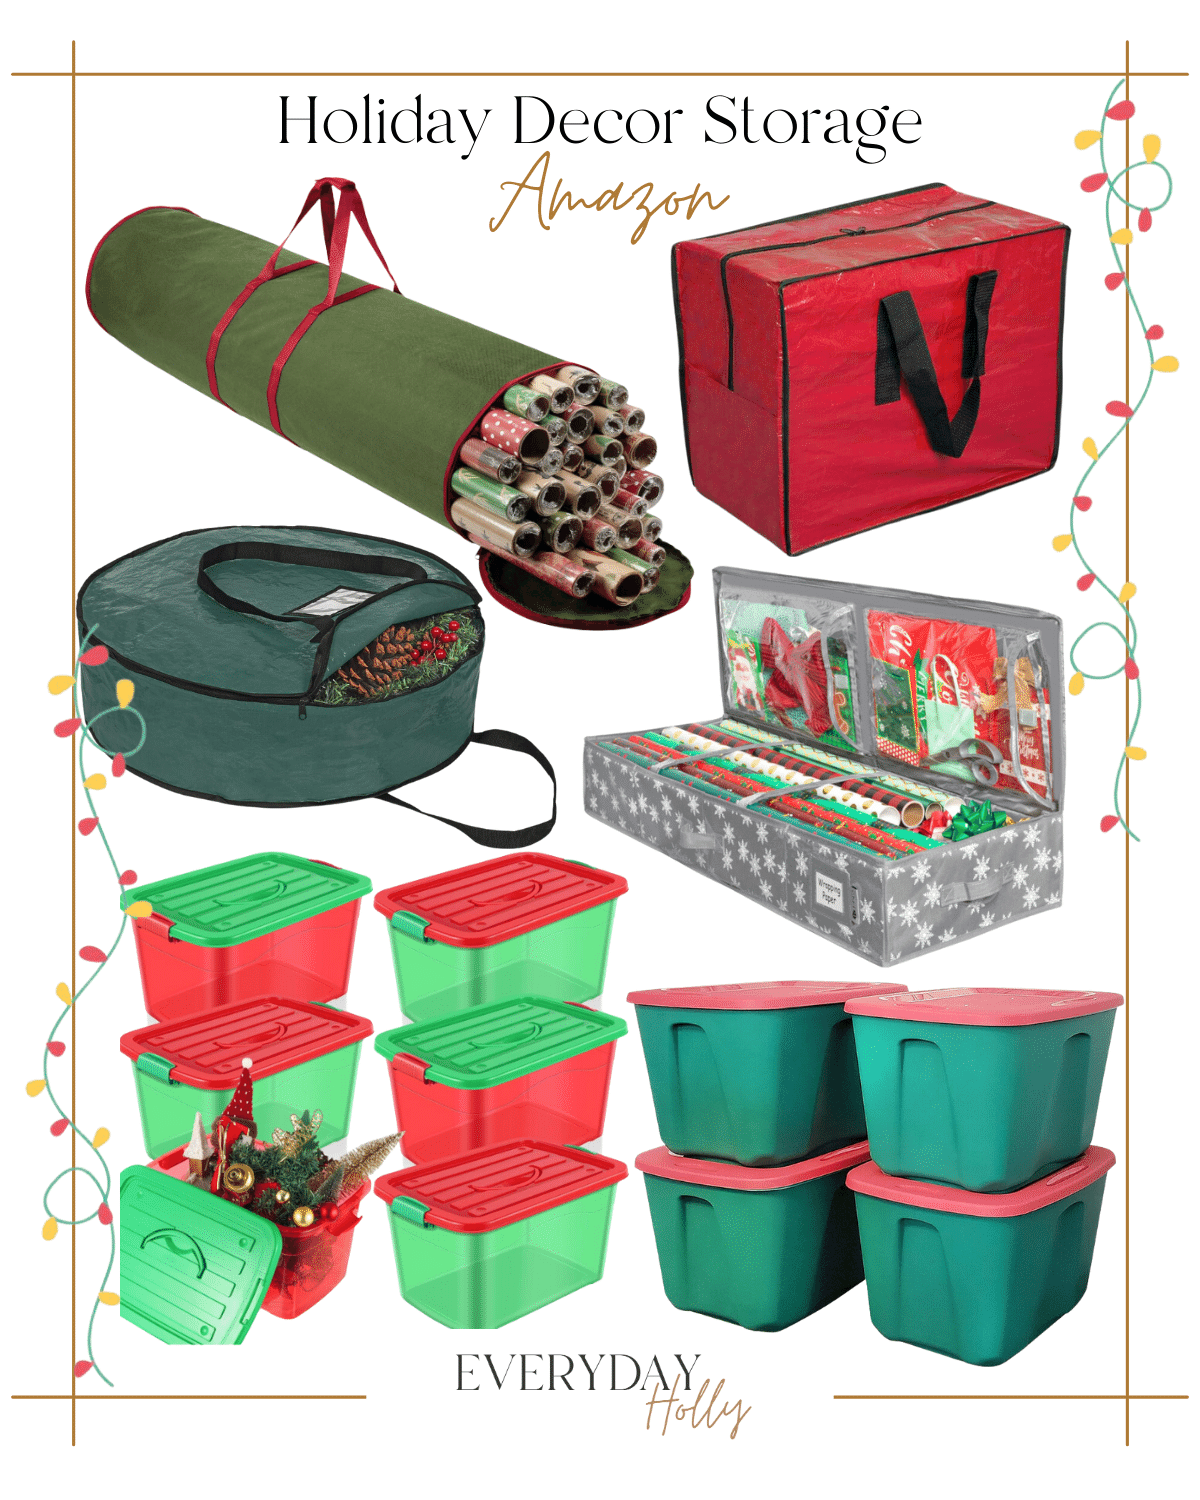 wrap up christmas quality storage and organization | #wrapup #christmas #storage #organization #holidays #wrpapingpaper #christmastree #treetopper ##holiday #holidaydecor #tote #toteboxes